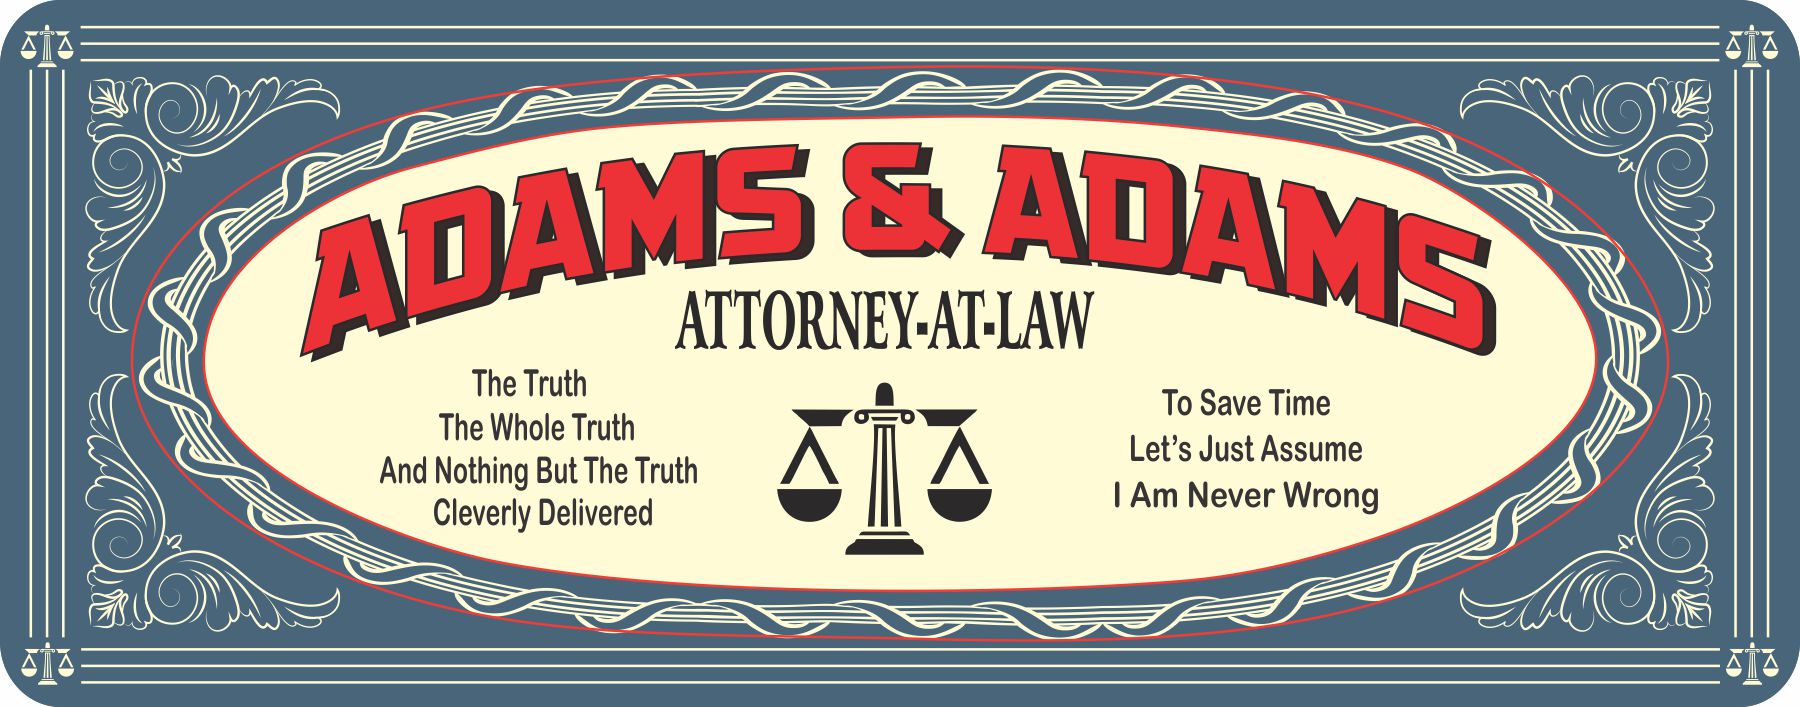 attorney at law sign